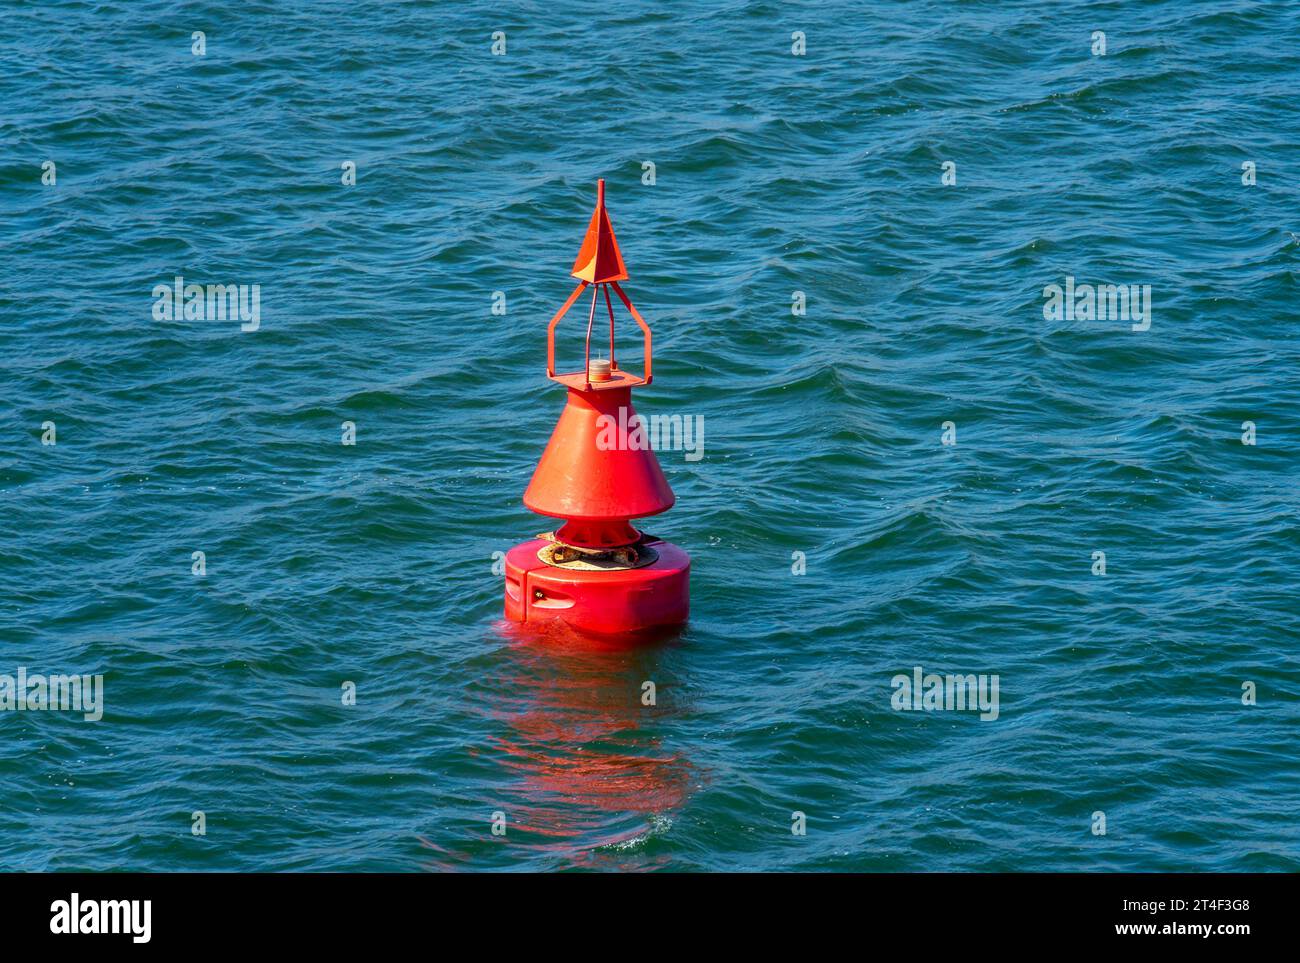 A red channel marker floating on ocean water Stock Photo